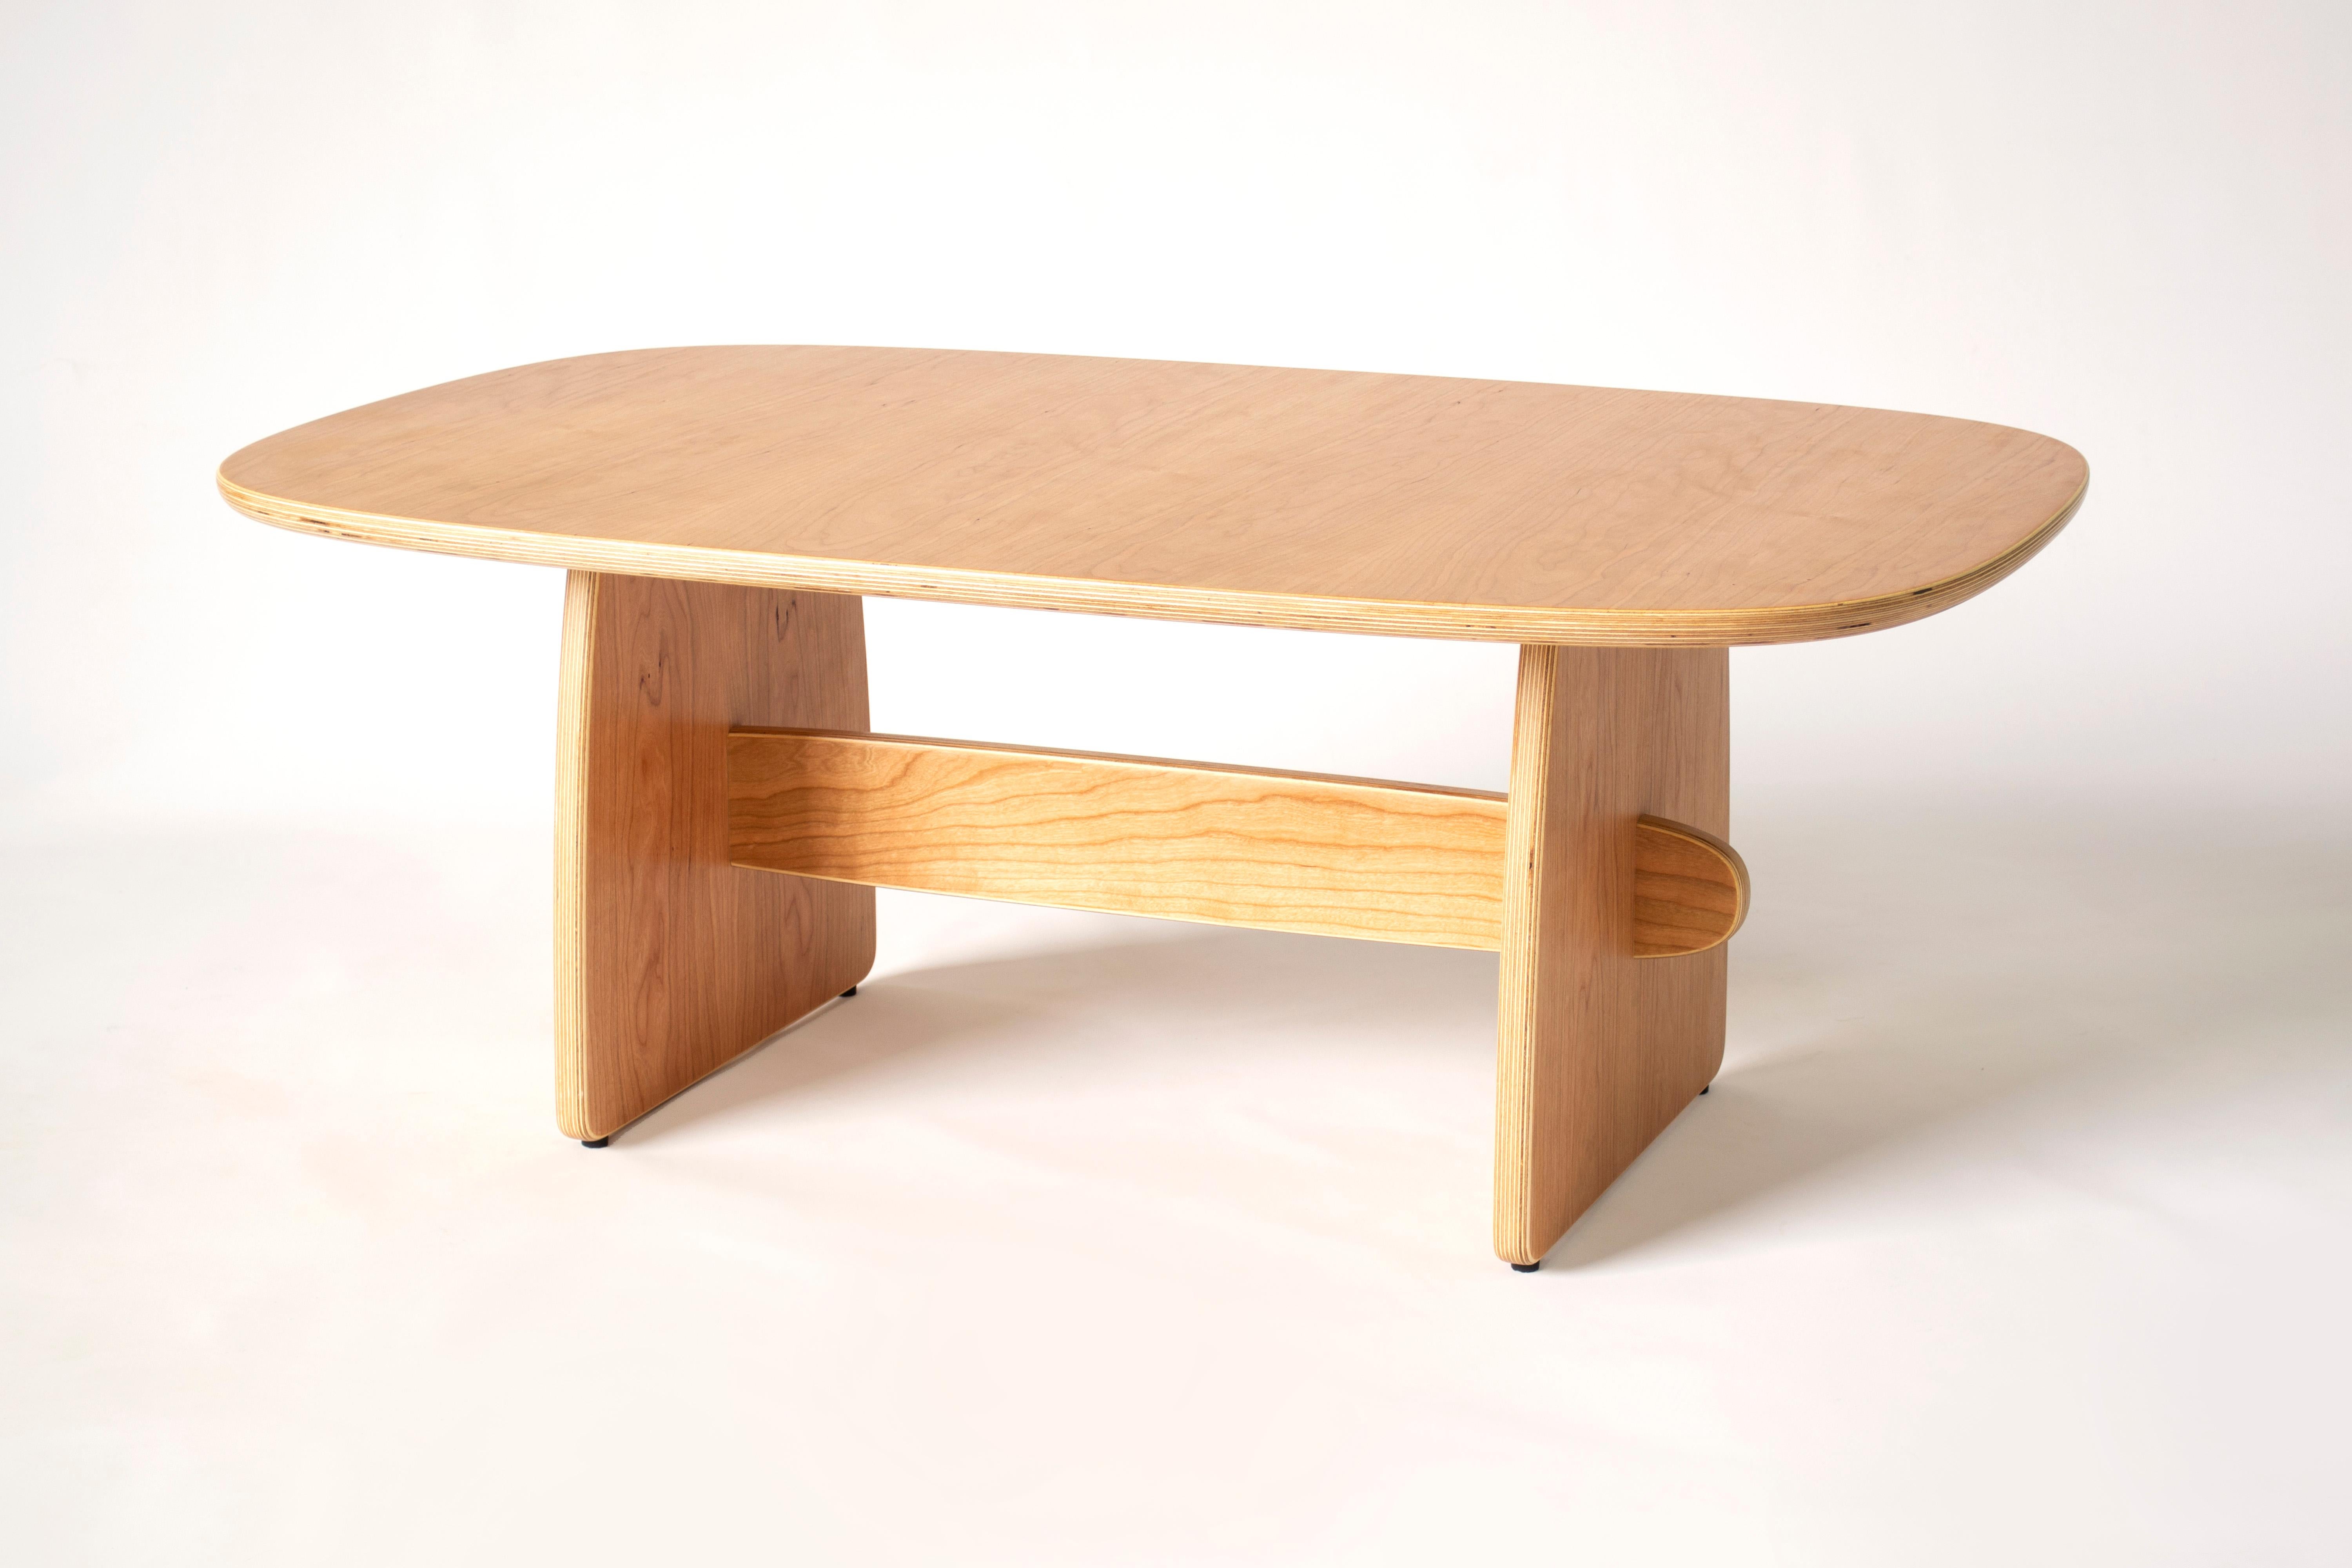 The Woodbine coffee table is made from thick hardwood plywood and cherry veneer with a hand rubbed oil finish. The playful base brings a bright and cheery pop to any space. Custom sizes and material options available, Please see the additional